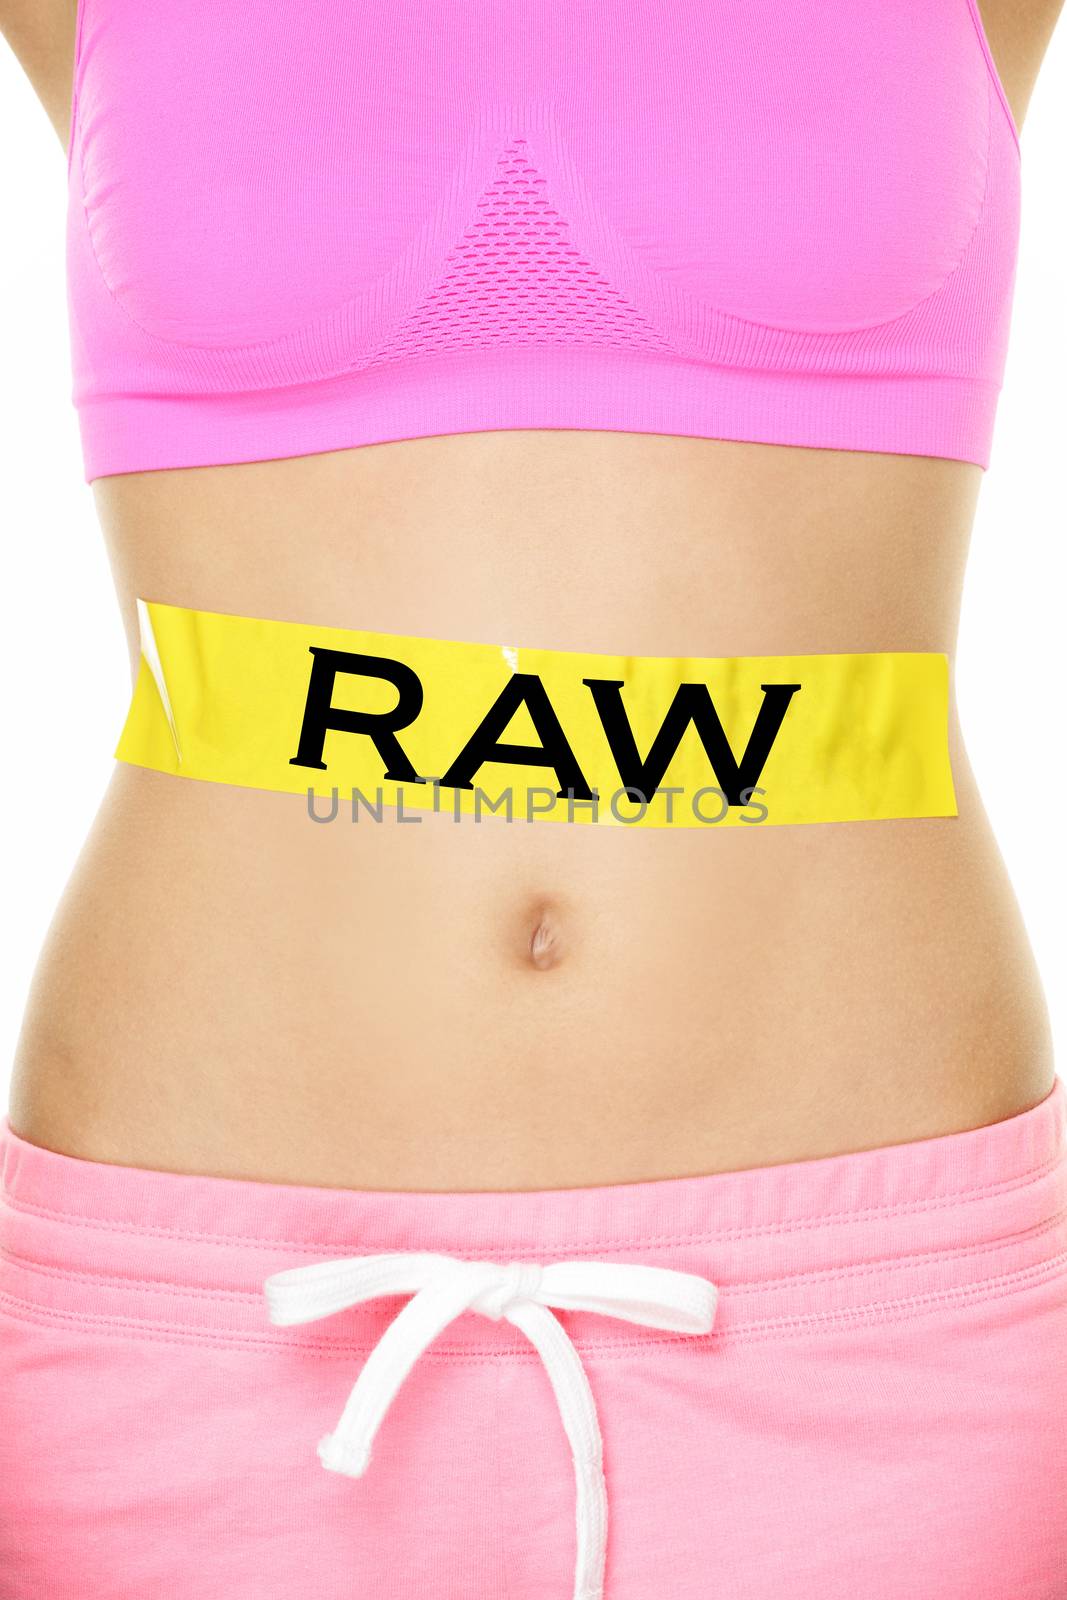 Raw food diet concept - closeup of woman's stomach eating only raw ingredients. New trend in nutrition of only uncooked or unprocessed food. Yellow label as warning or caution applied on body.